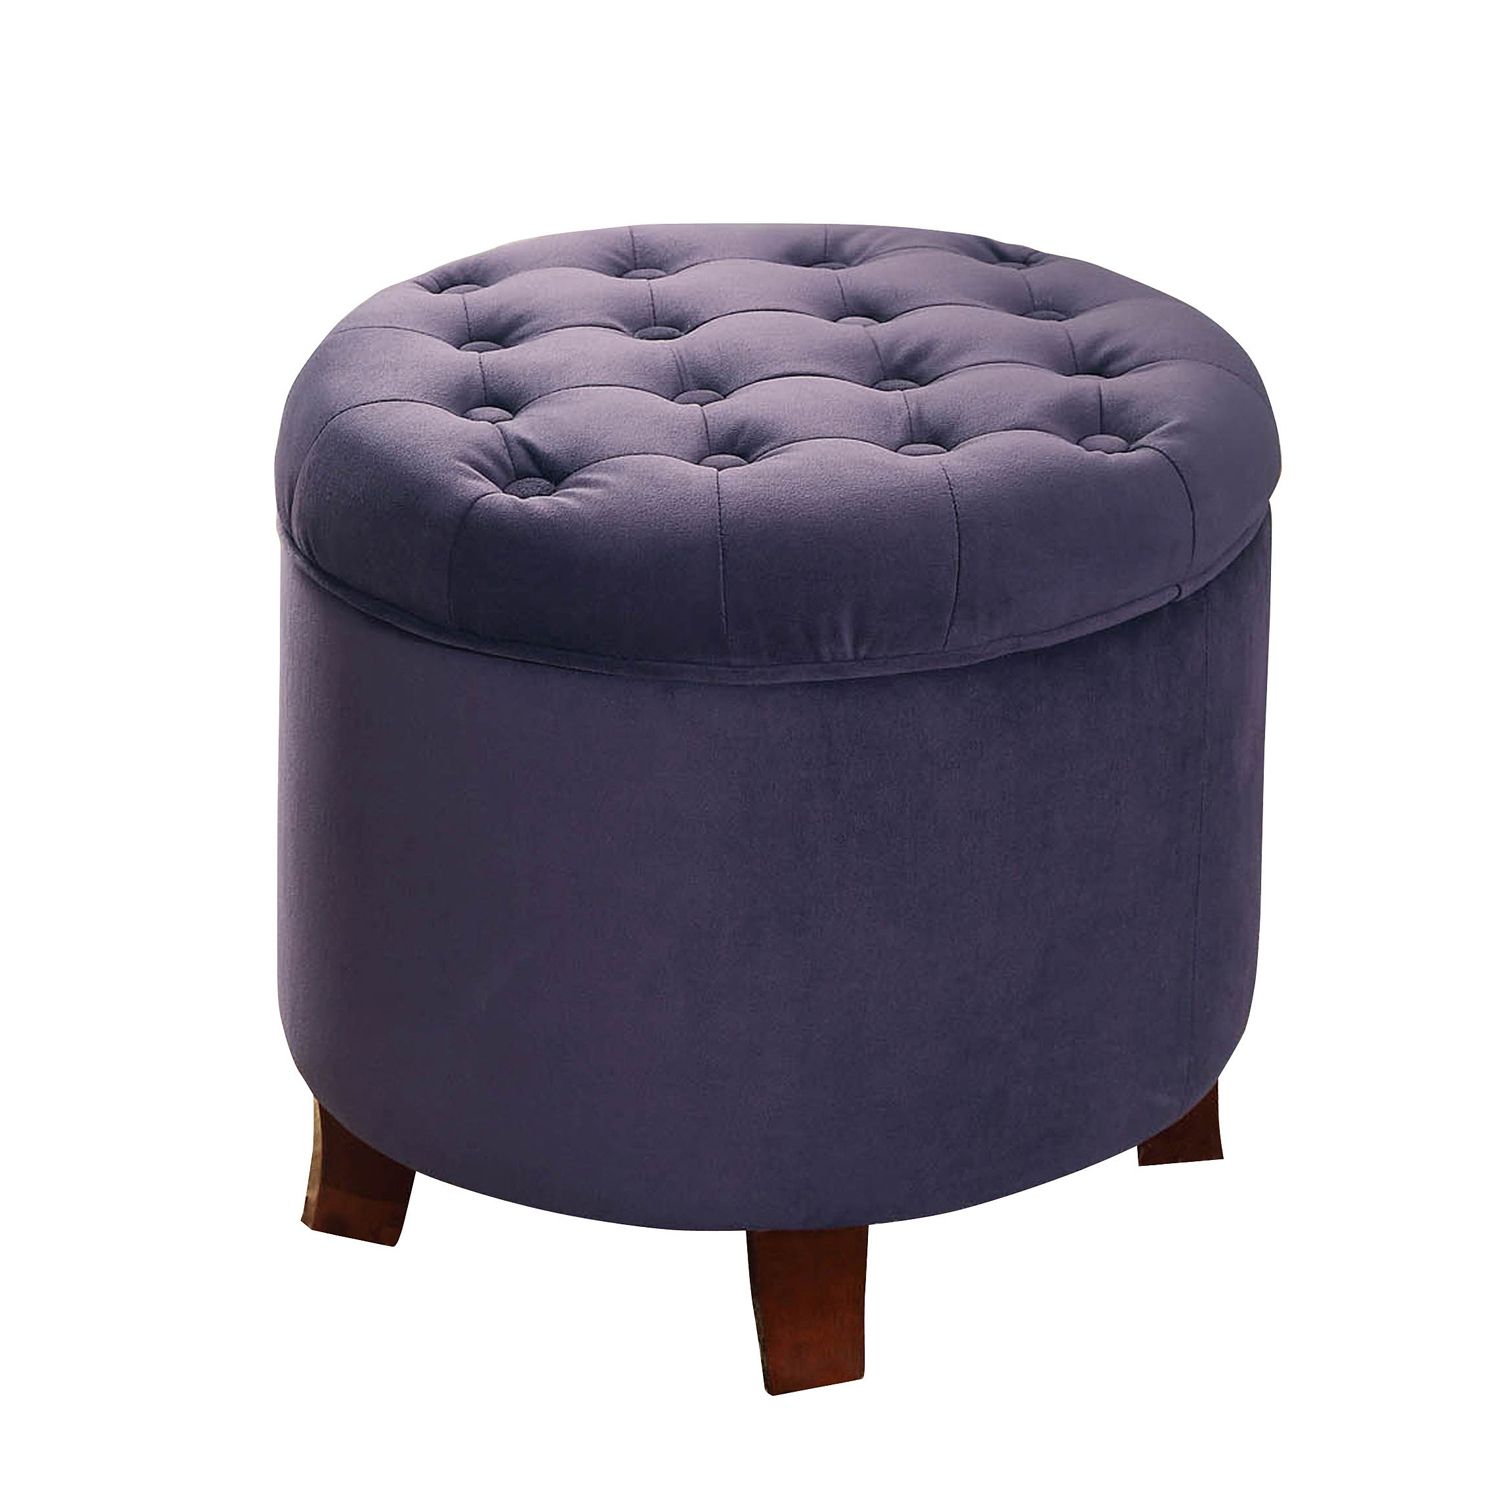 Latest Gray Velvet Tufted Storage Ottomans Throughout Purple Velvet Tufted Round Storage Ottoman – Pier1 Imports (View 3 of 10)